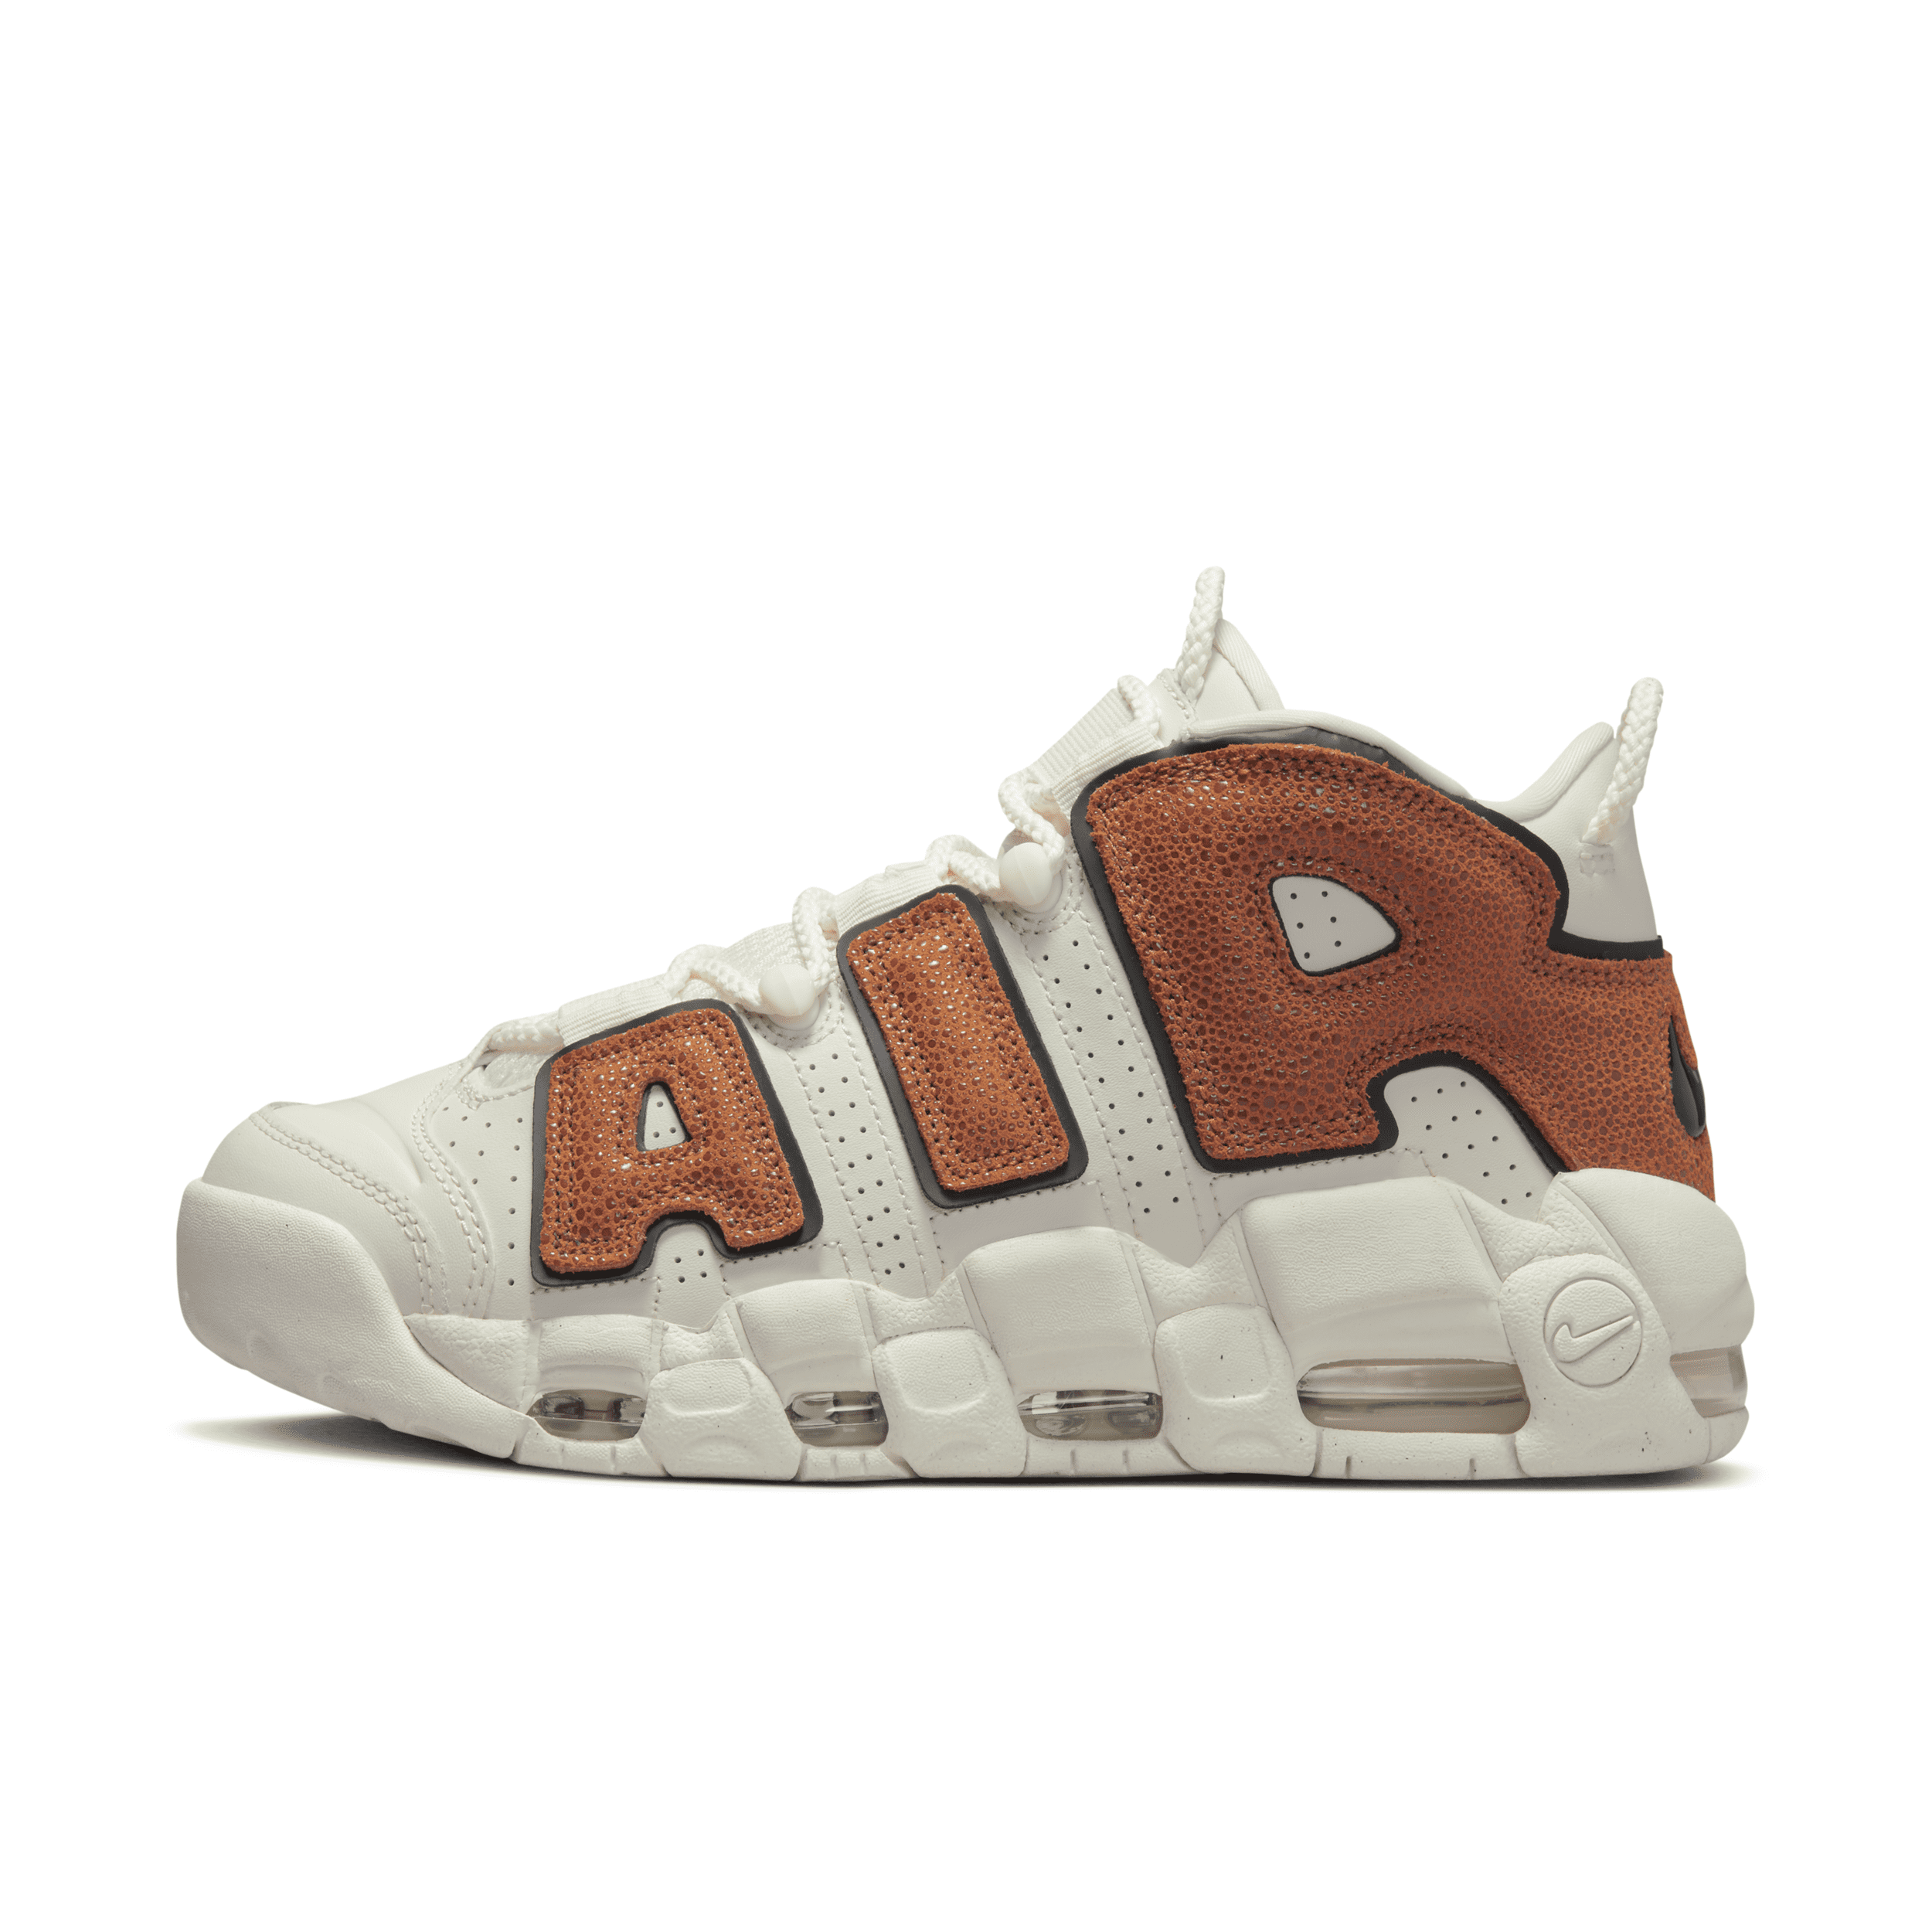 NIKE WOMEN'S AIR MORE UPTEMPO SHOES,14293040